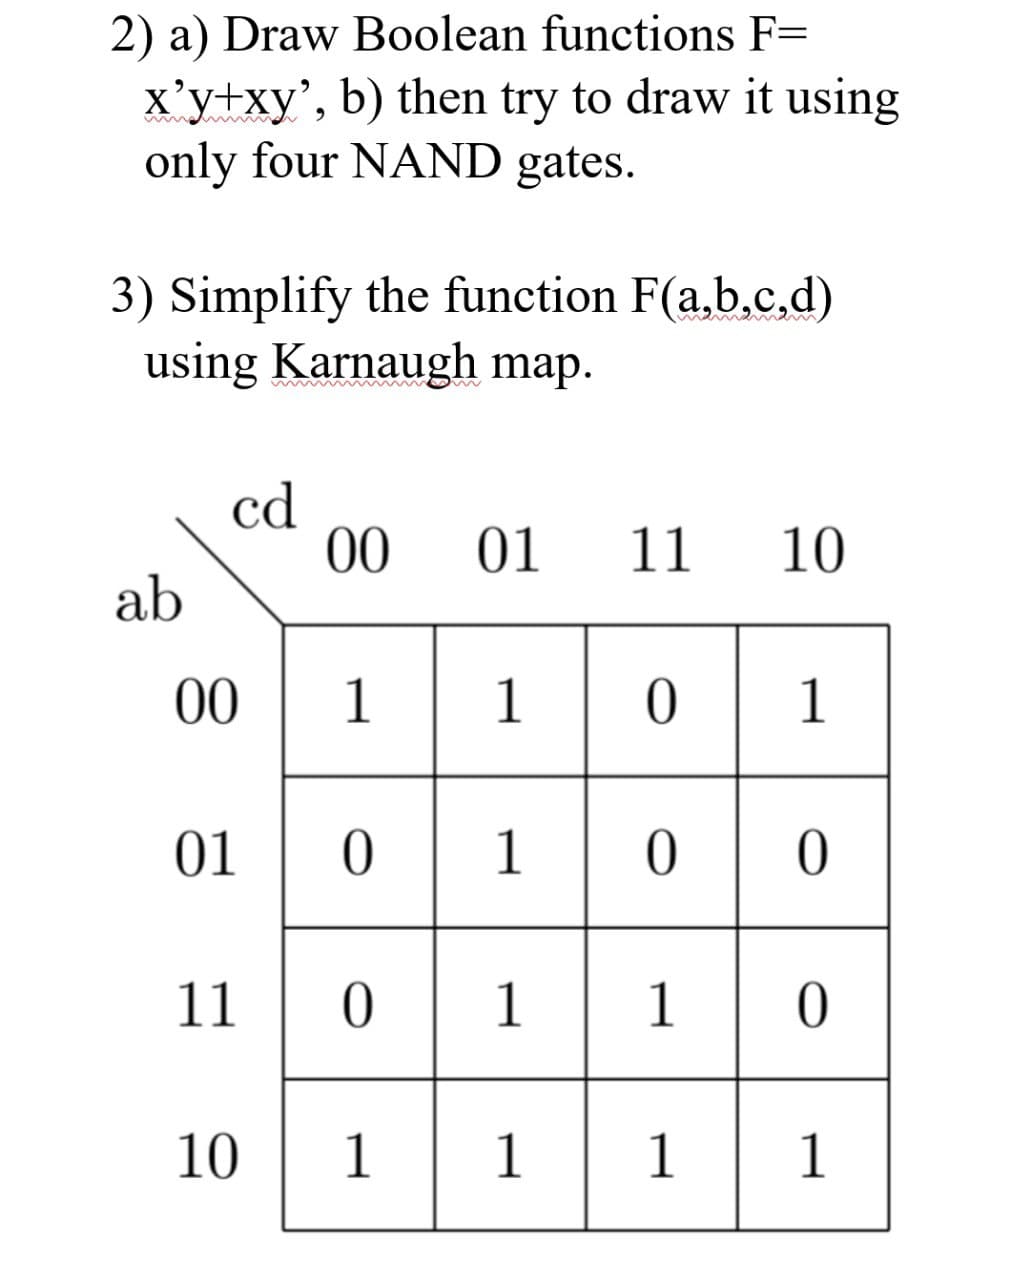 2) a) Draw Boolean functions F=
x'y+xy', b) then try to draw it using
only four NAND gates.
3) Simplify the function F(a,b,c,d)
using Karnaugh map.
ab
cd
00
01
11
10
00 01 11 10
110
01
01
1
10
1 1
0
0 0 1 1
1 1 0
1 1